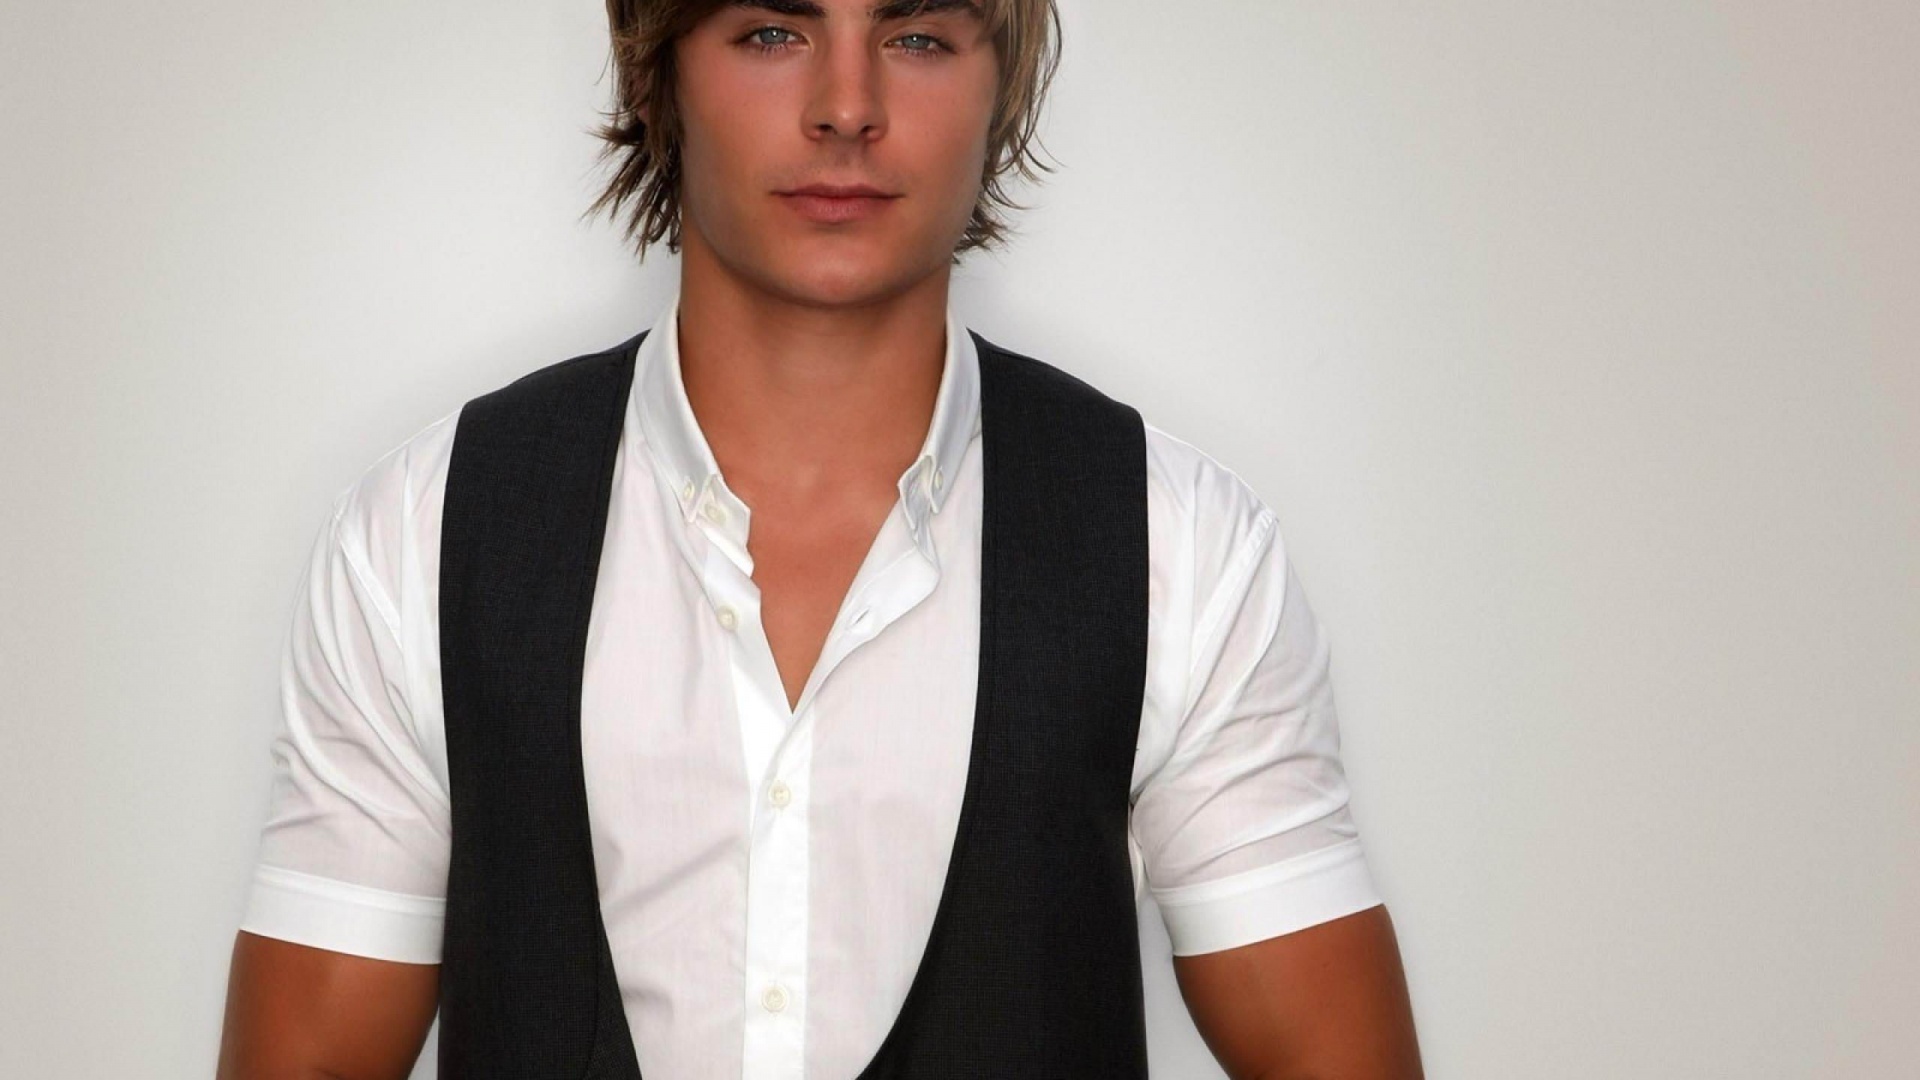 Zac Efron From High School Musical Celebrity